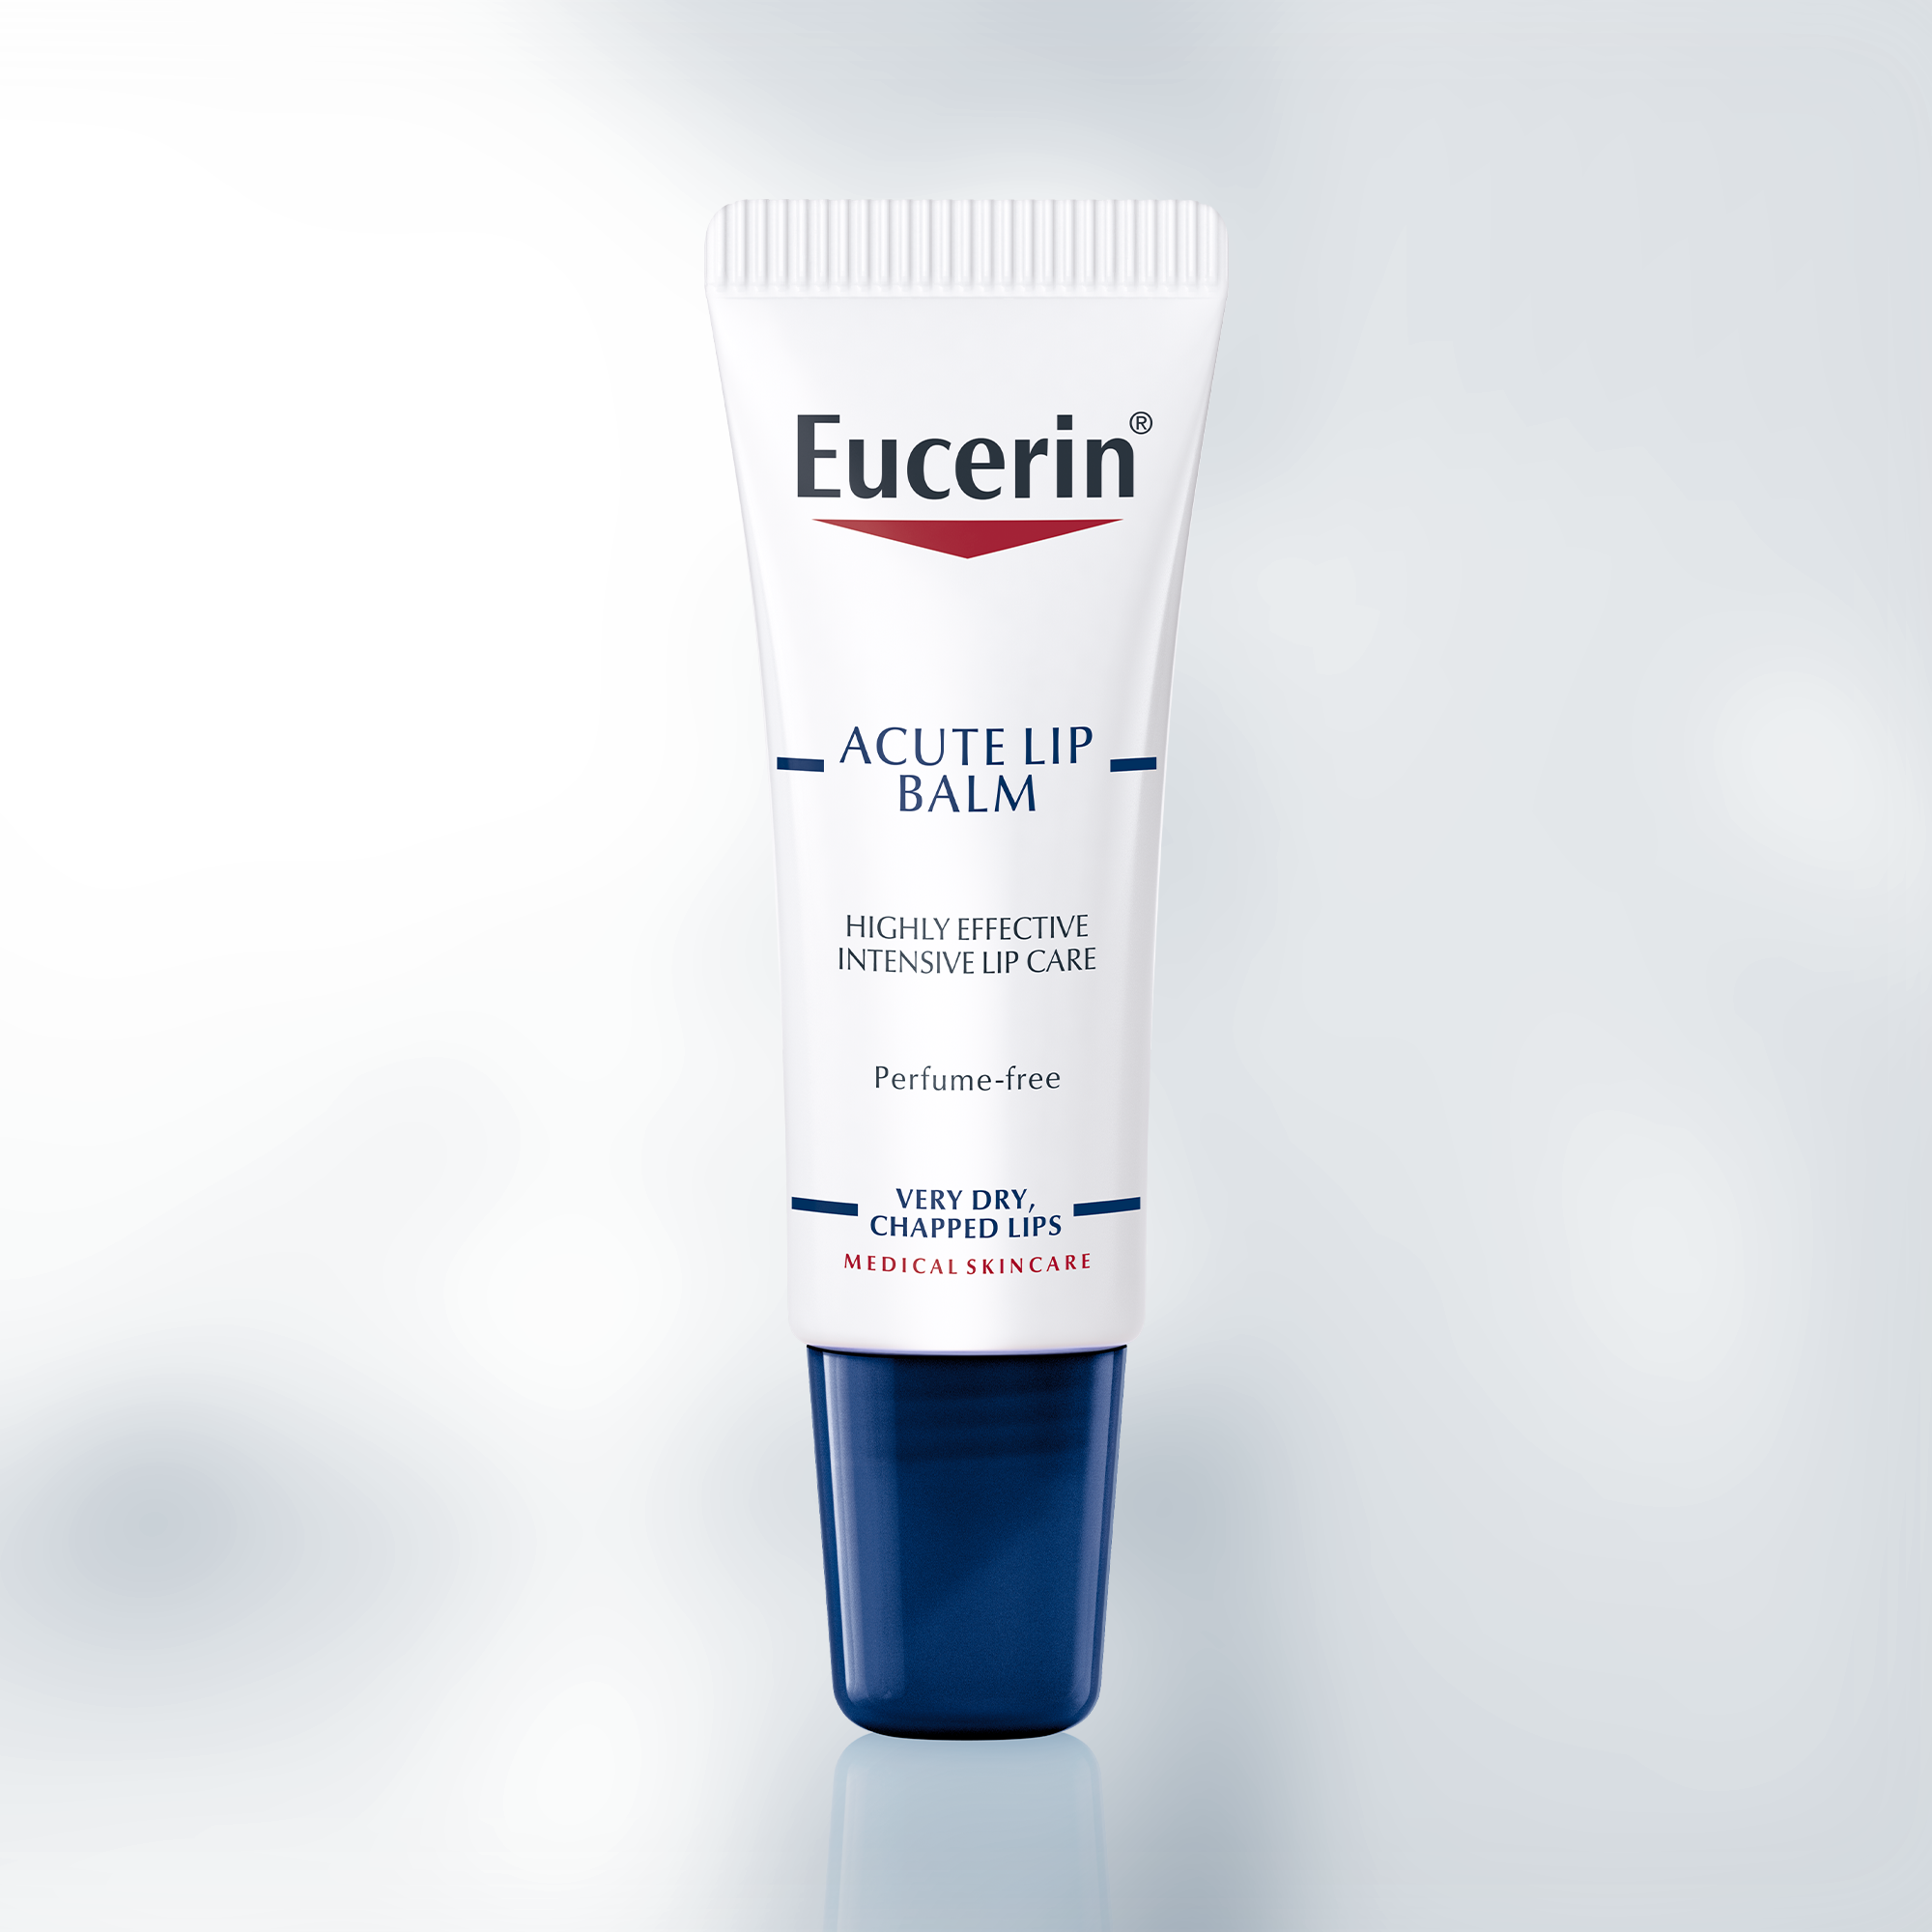 Eucerin Complete Repair Acute Lip Balm Dry Skin Browse the large selection of natural lip care products from iherb. acute lip balm dry skin